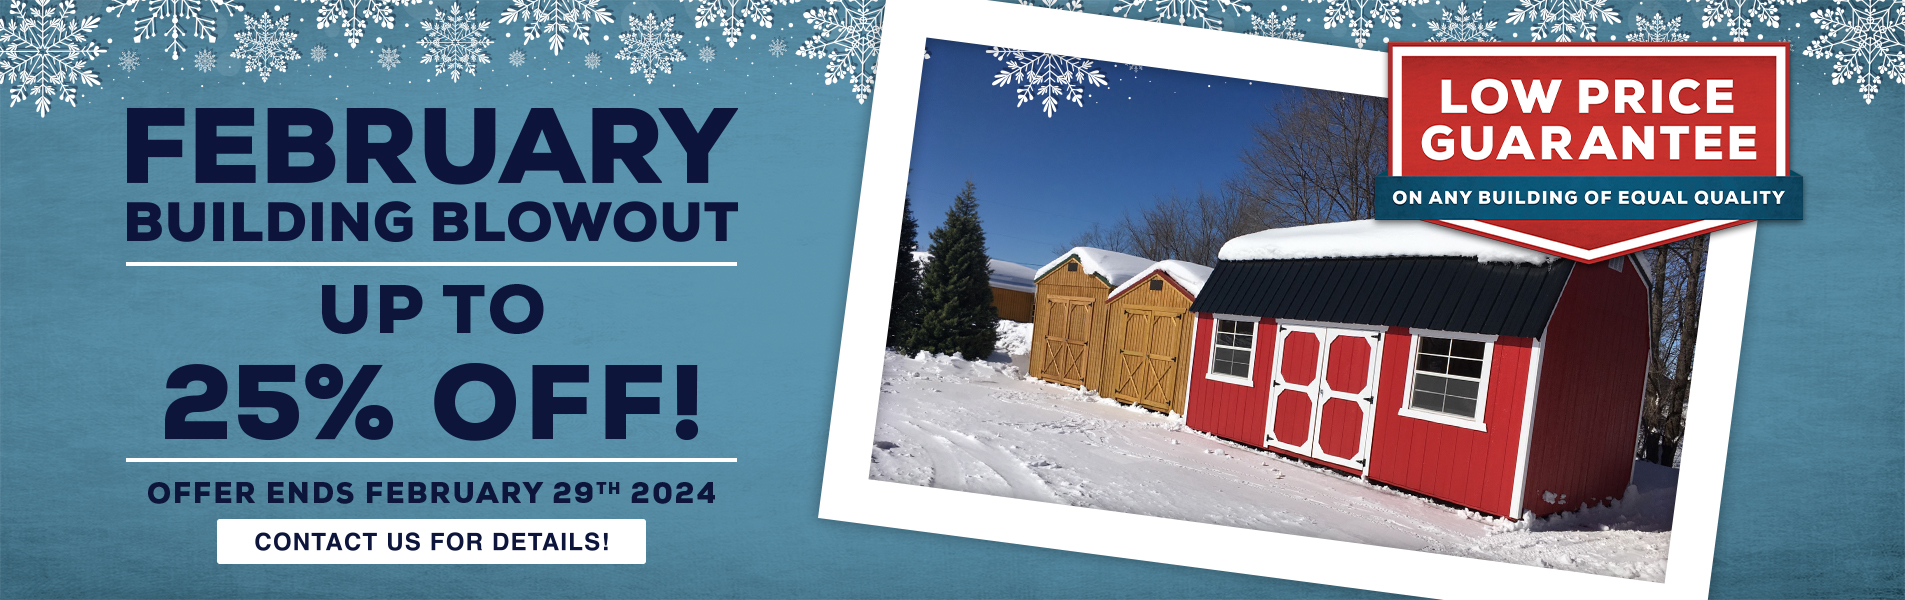 February Building Blowout Sales Event for shed sales at French Creek Shed Sales in Casper, WY Sheds up to 25% off!